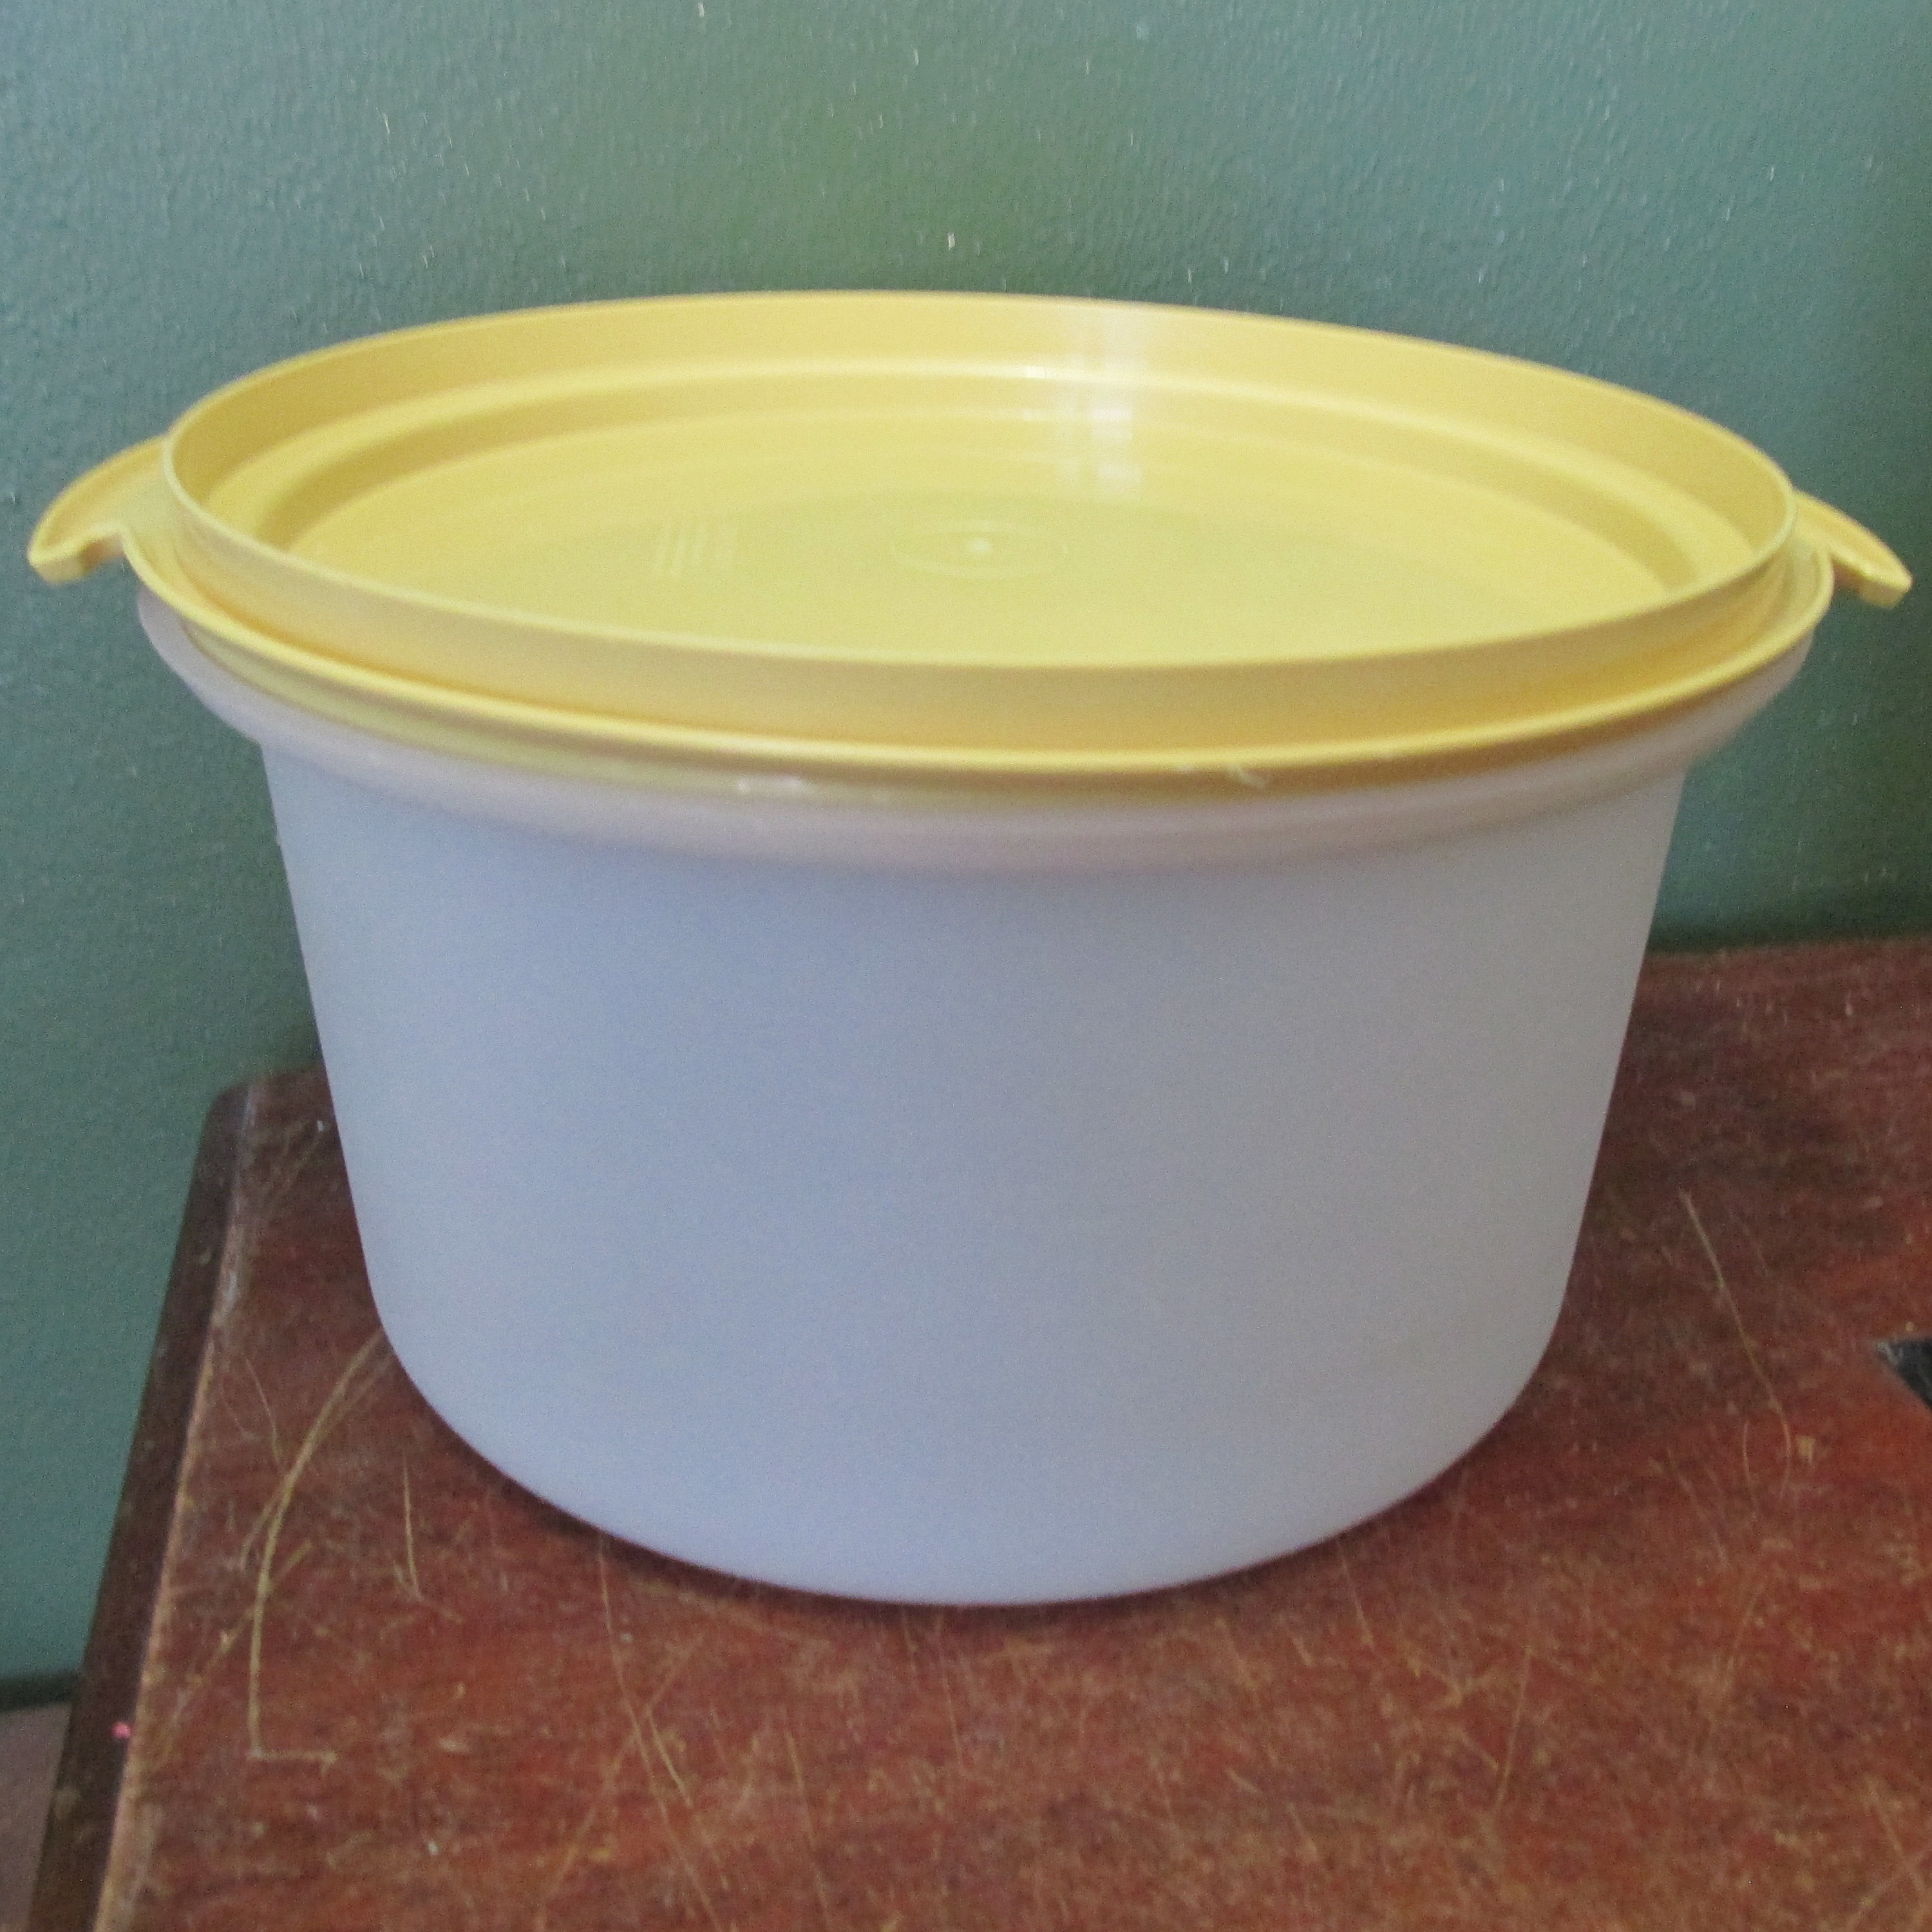 Tupperware Expandable Cake/Pie Carrier - 21036632